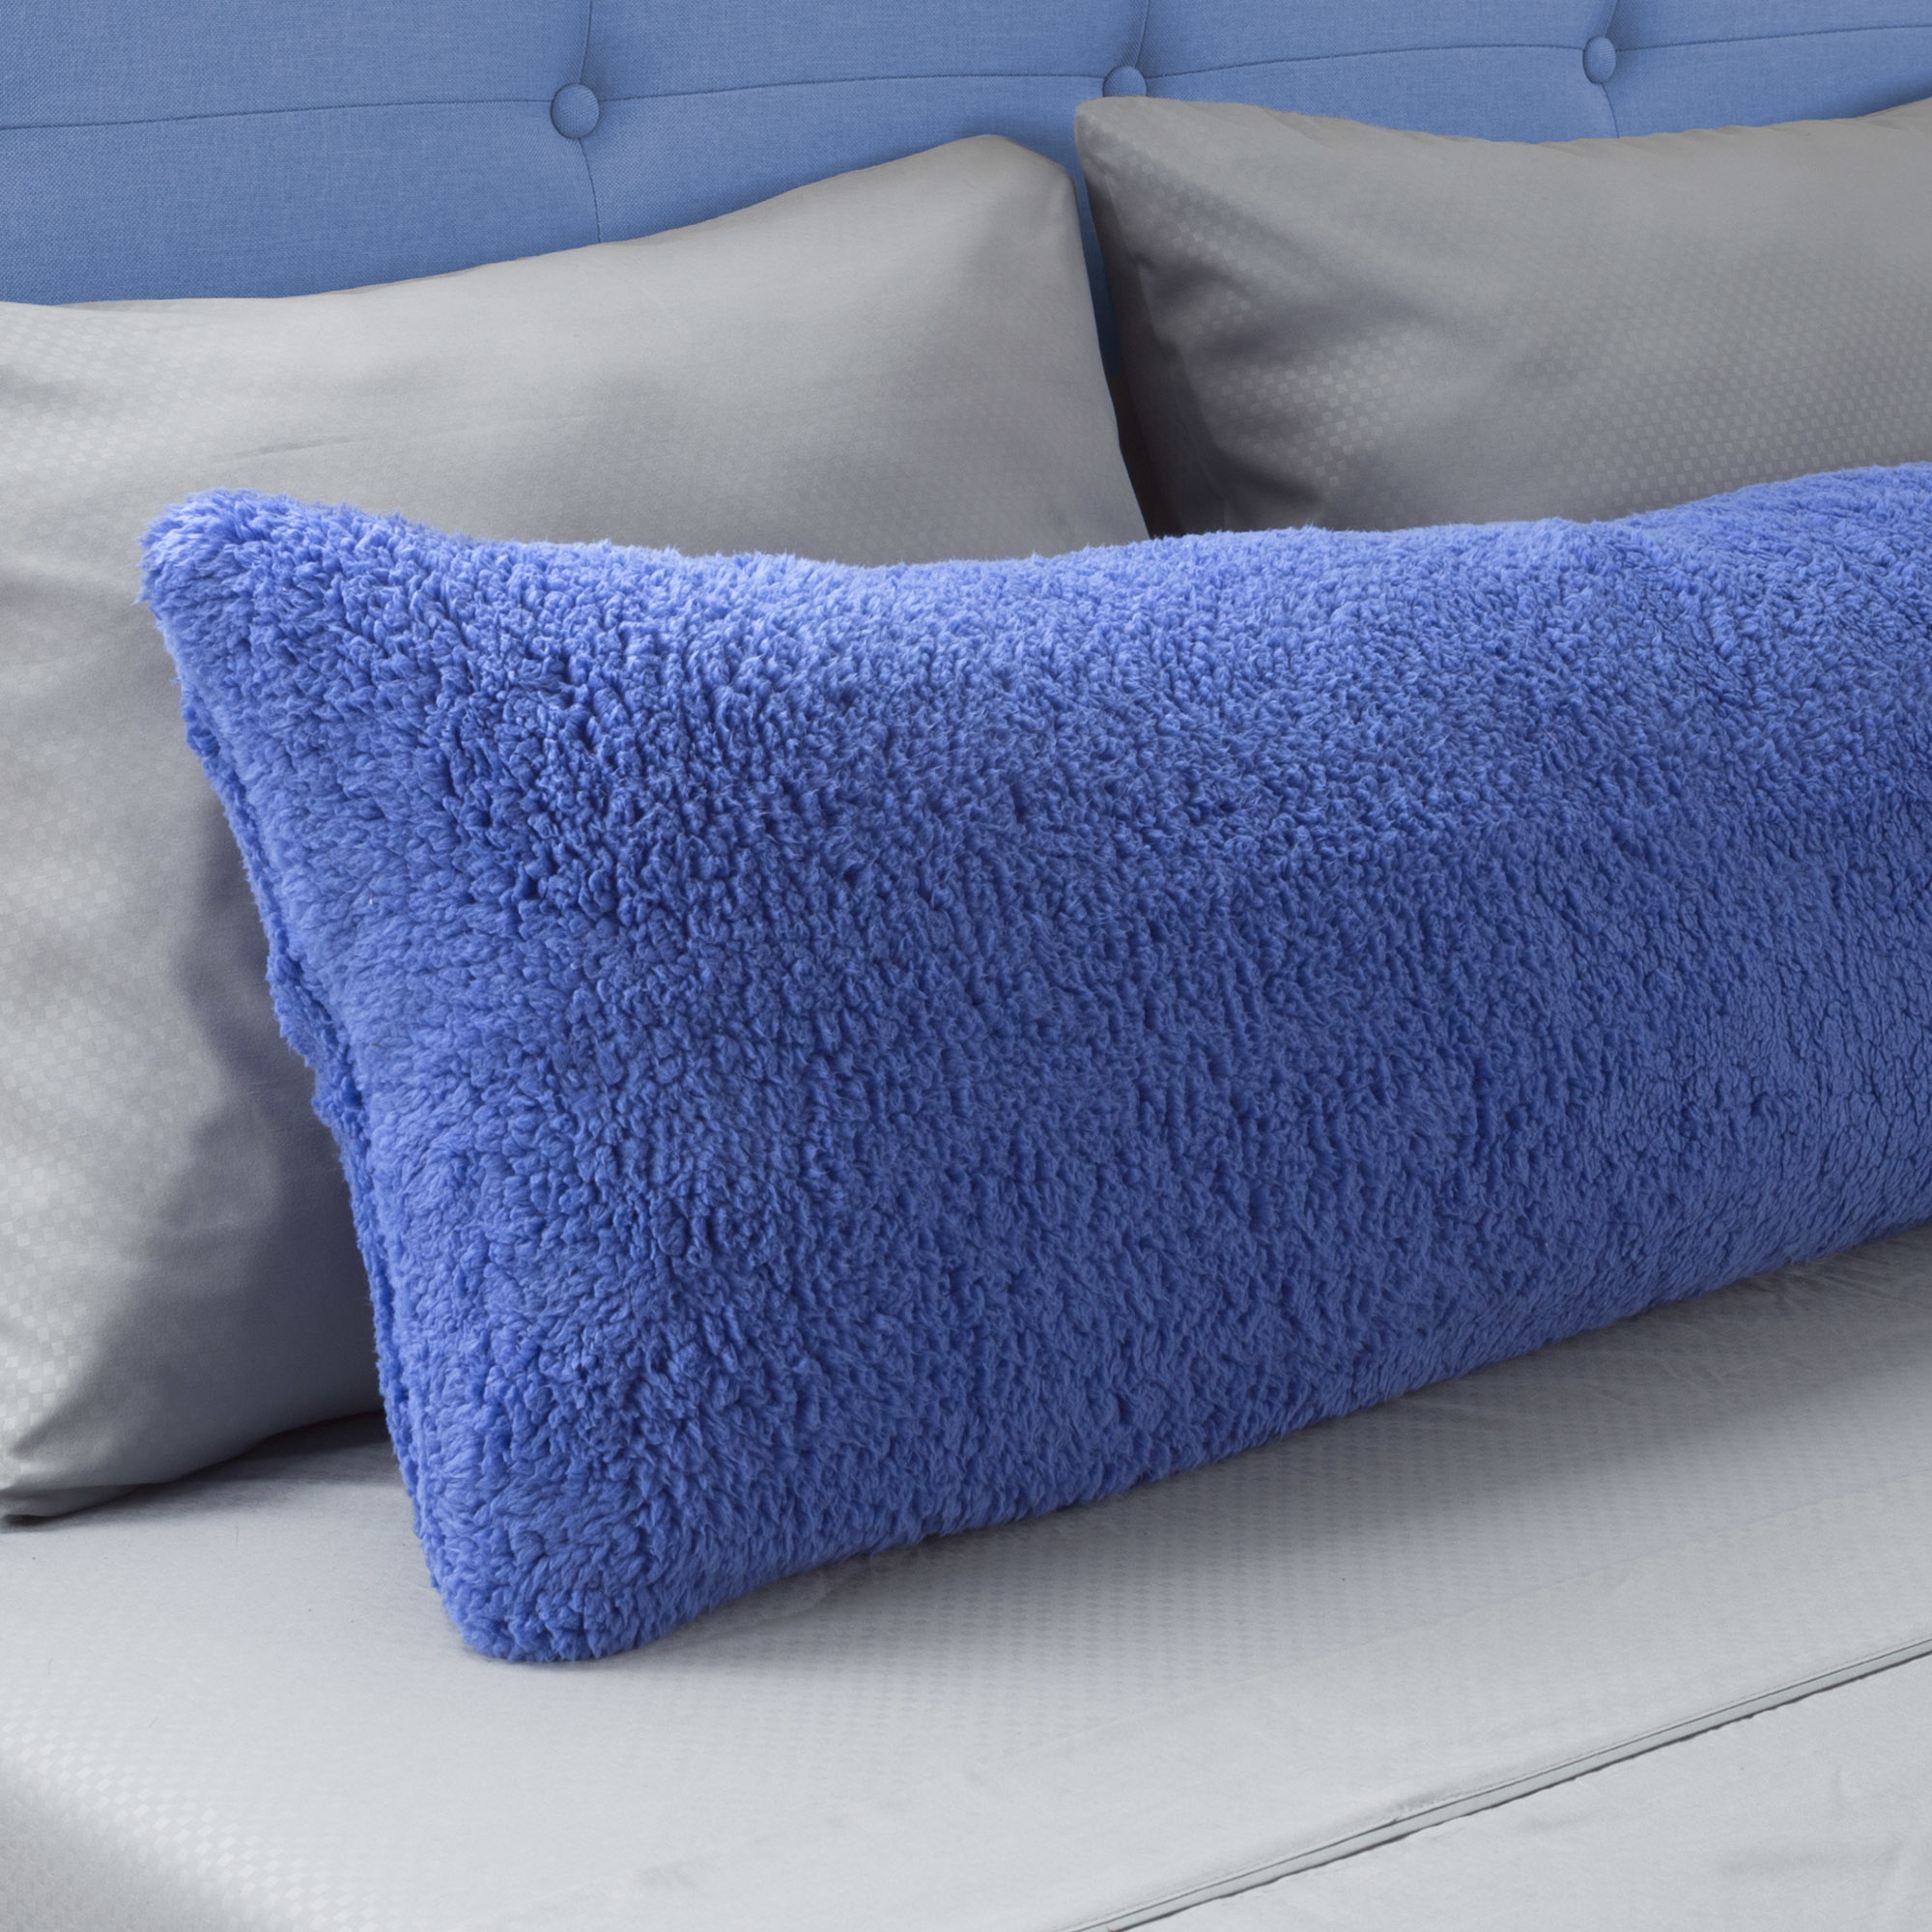 Warm Body Pillow Cover Soft Comfy Pillow Case Zippered Washable 52 X 18 Inches Blue